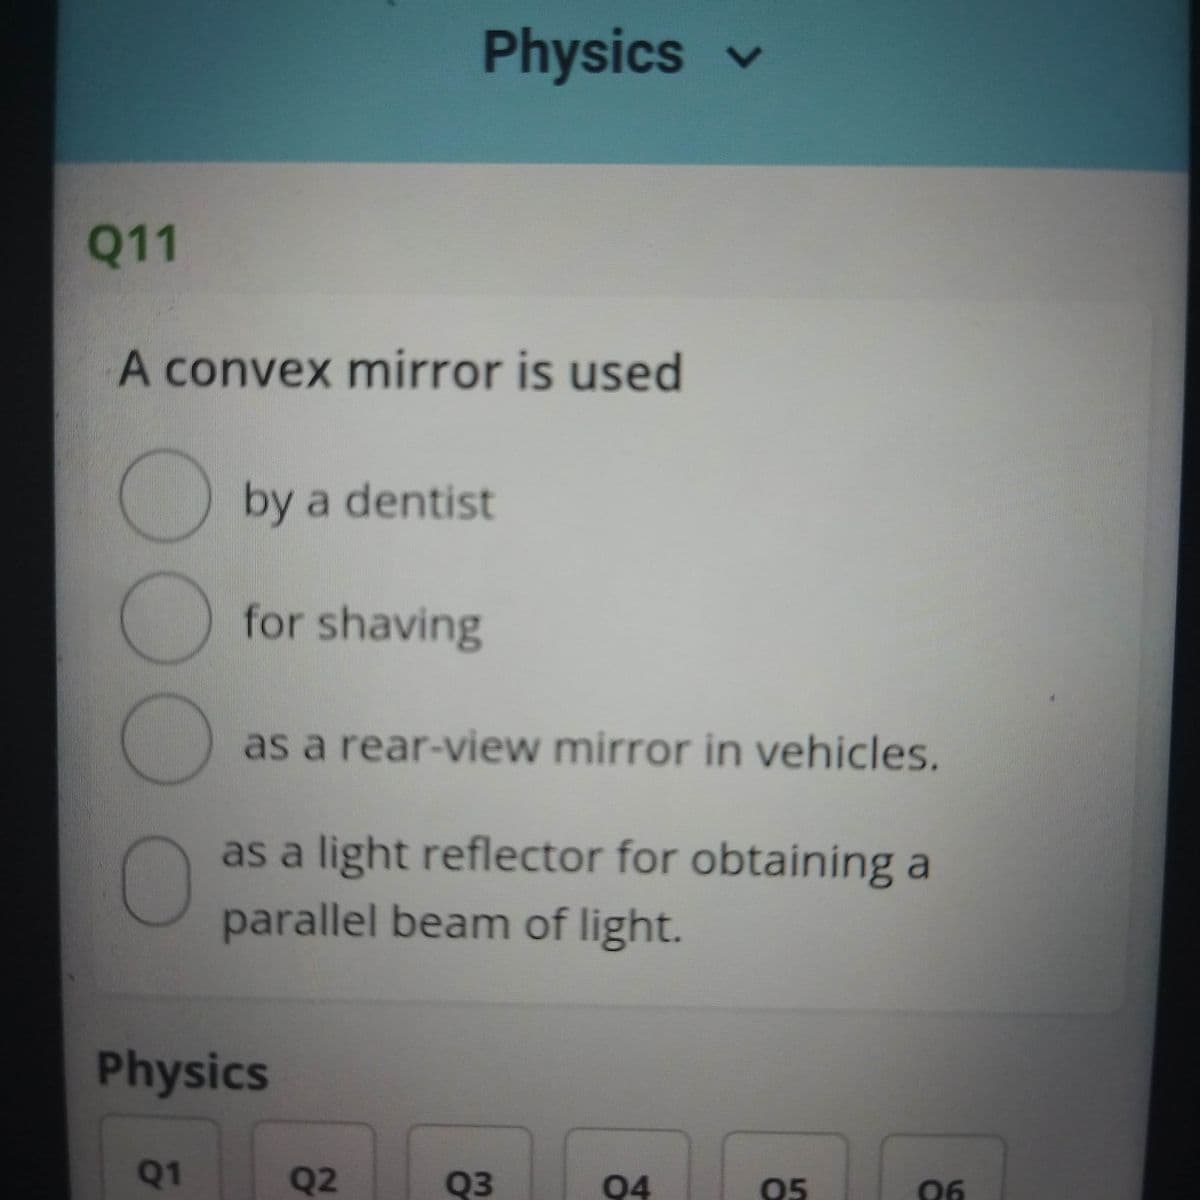 Physics v
Q11
A convex mirror is used
by a dentist
for shaving
as a rear-view mirror in vehicles.
as a light reflector for obtaining a
parallel beam of light.
Physics
Q1
Q2
Q3
Q4
05
06
